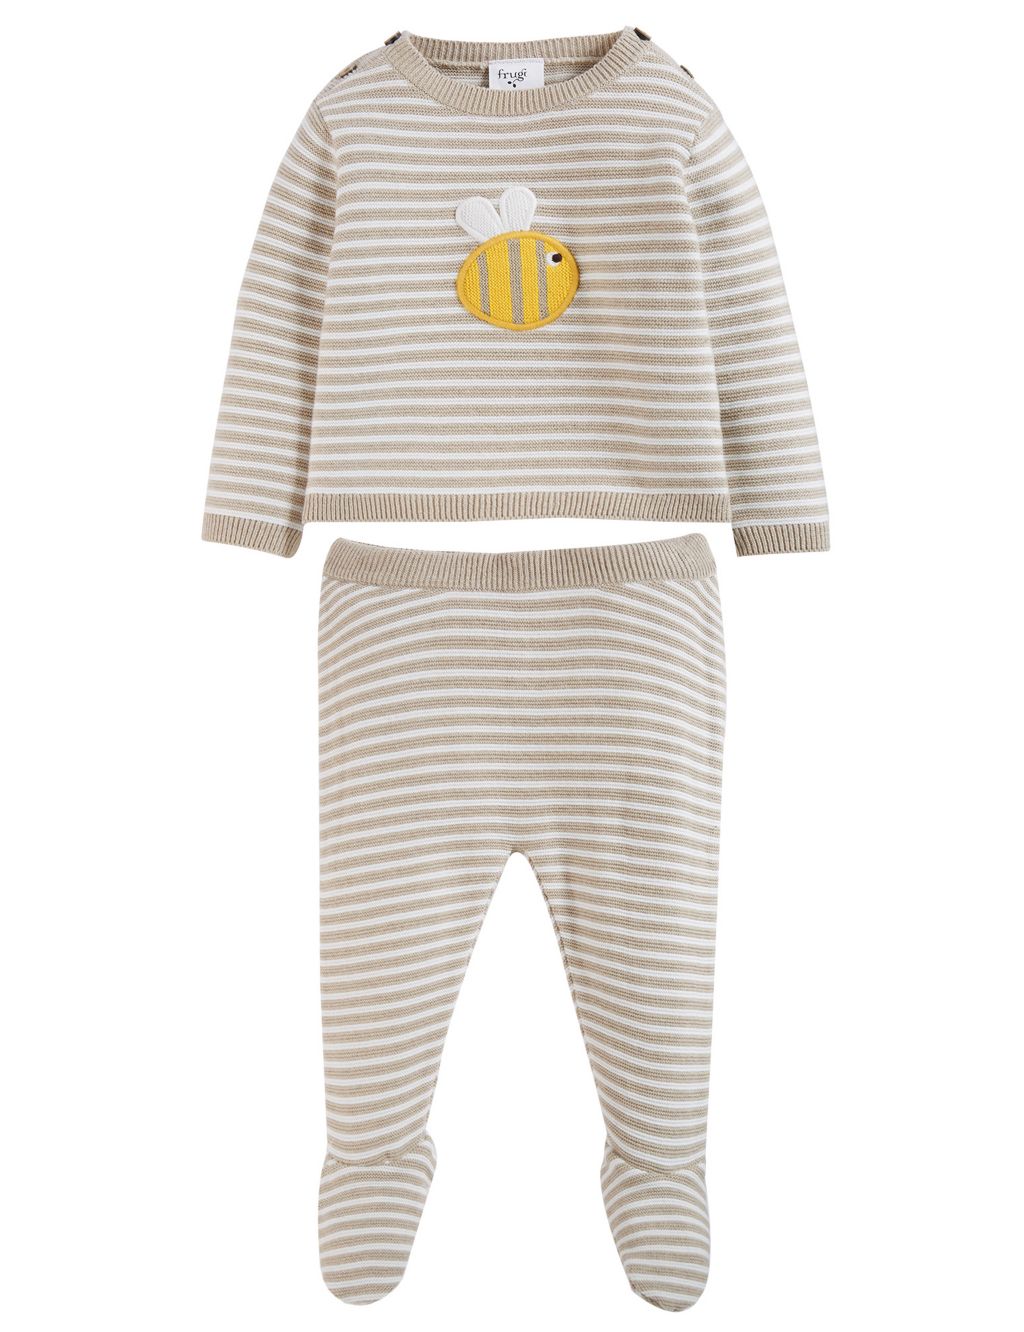 2pc Organic Cotton Striped Knitted Outfit (7lbs-4 Yrs) image 1